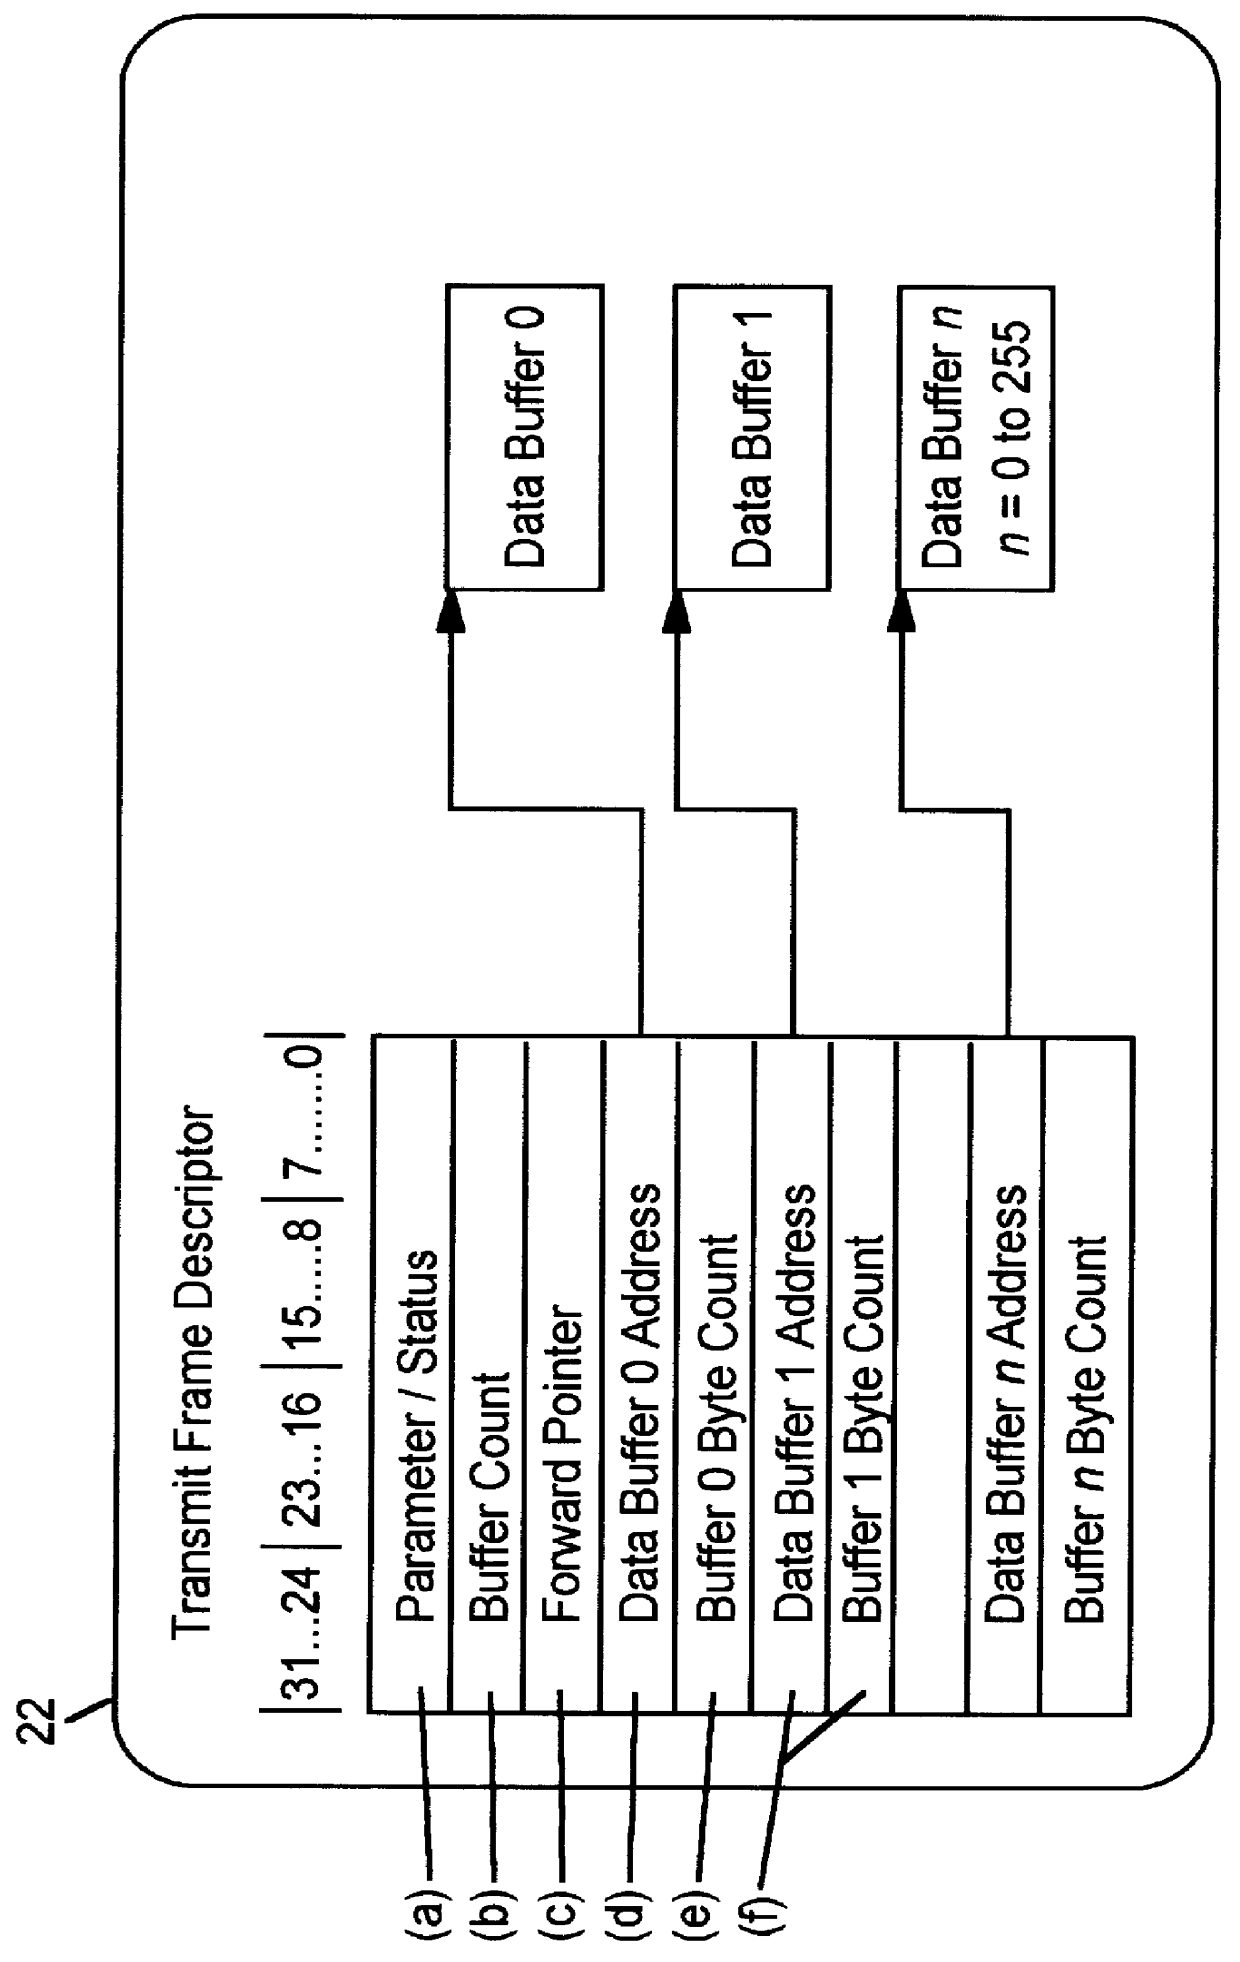 System and method for automatic retry of transmit, independent of a host processor, after an underrun occurs in a LAN